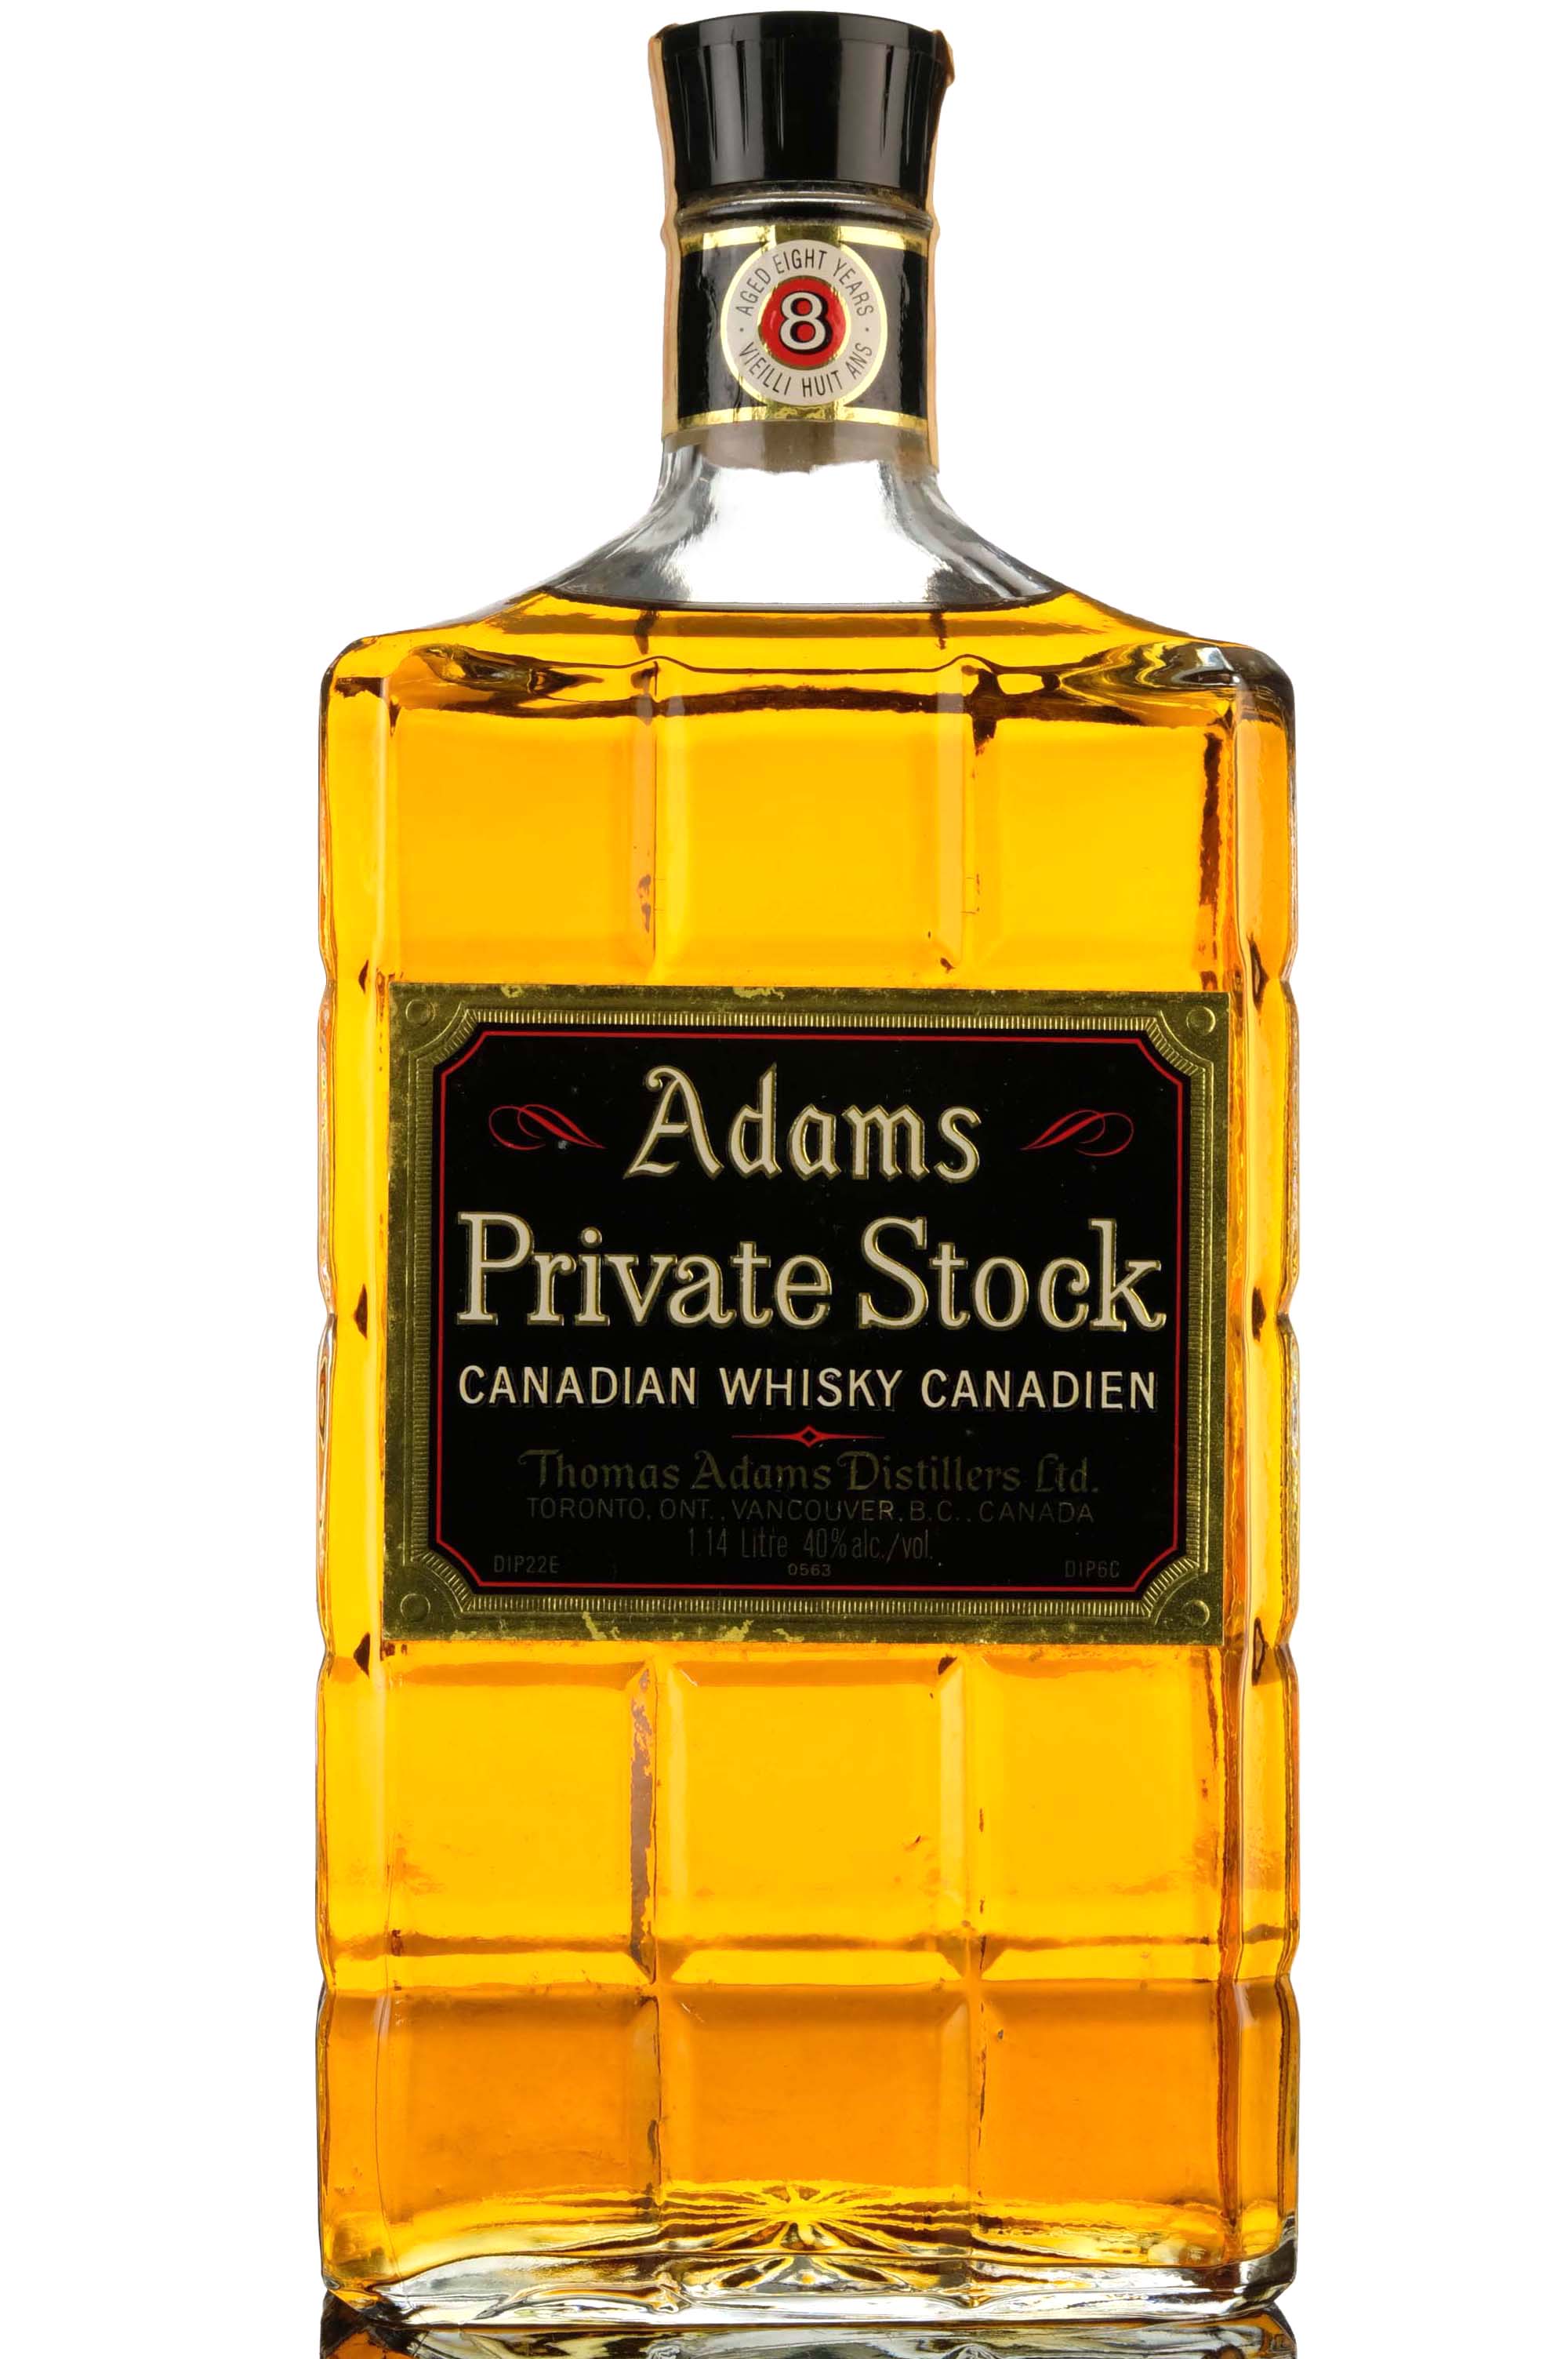 Adams 1977 - 8 Year Old - Private Stock - 1.14 Litres